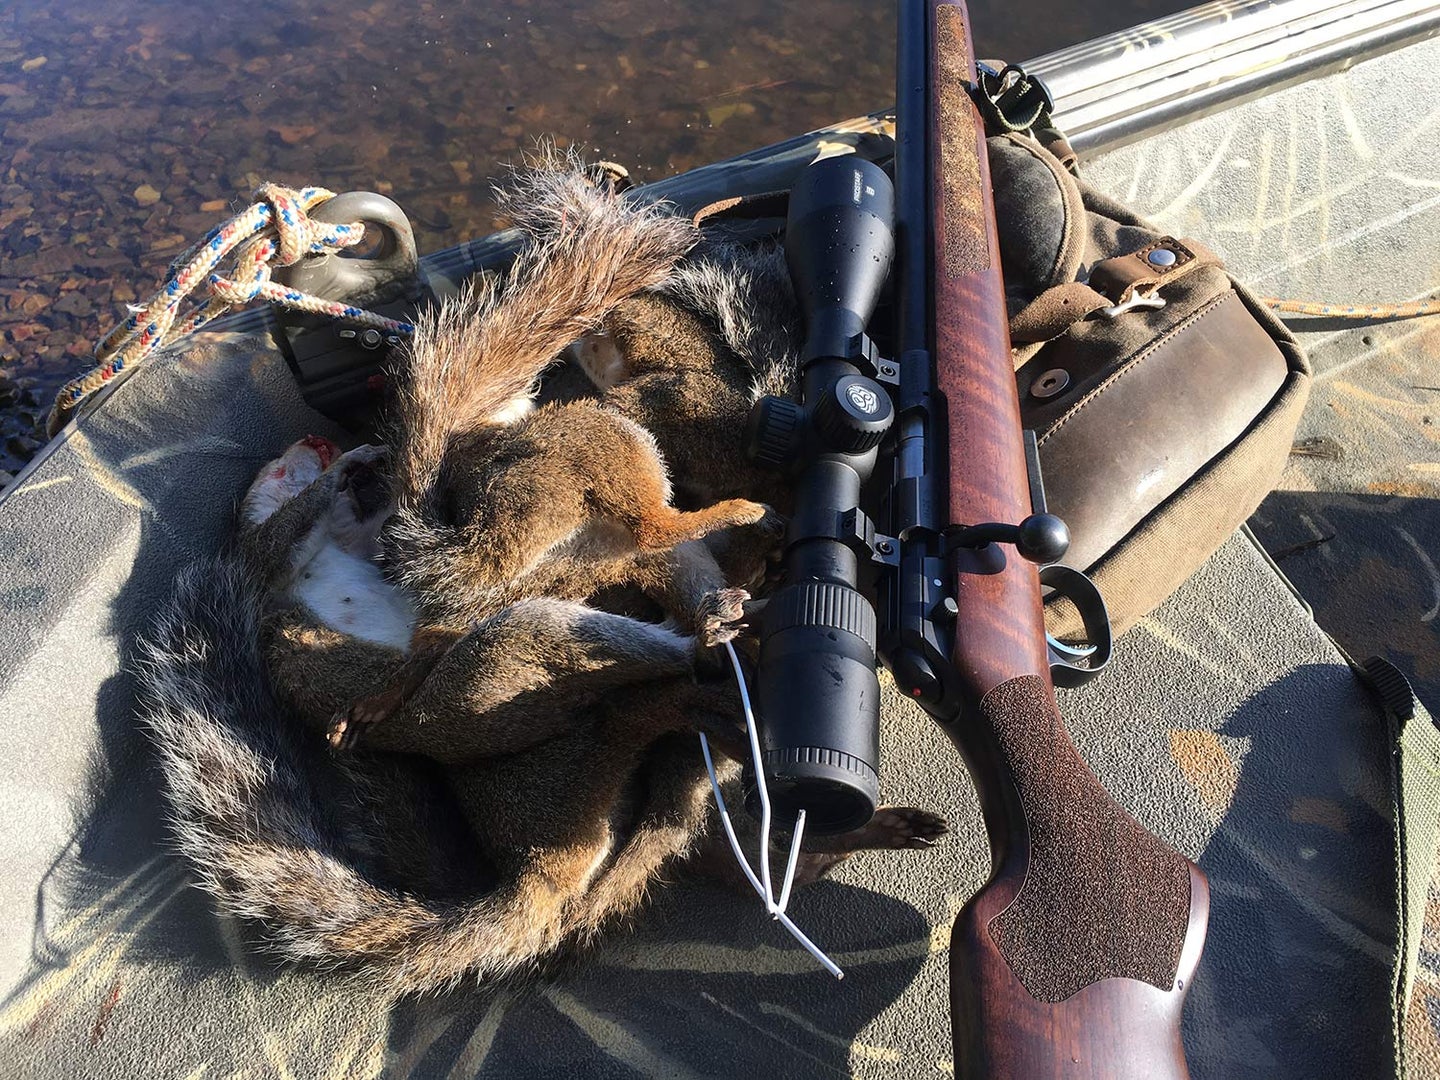 A rifle next to a small squirrel